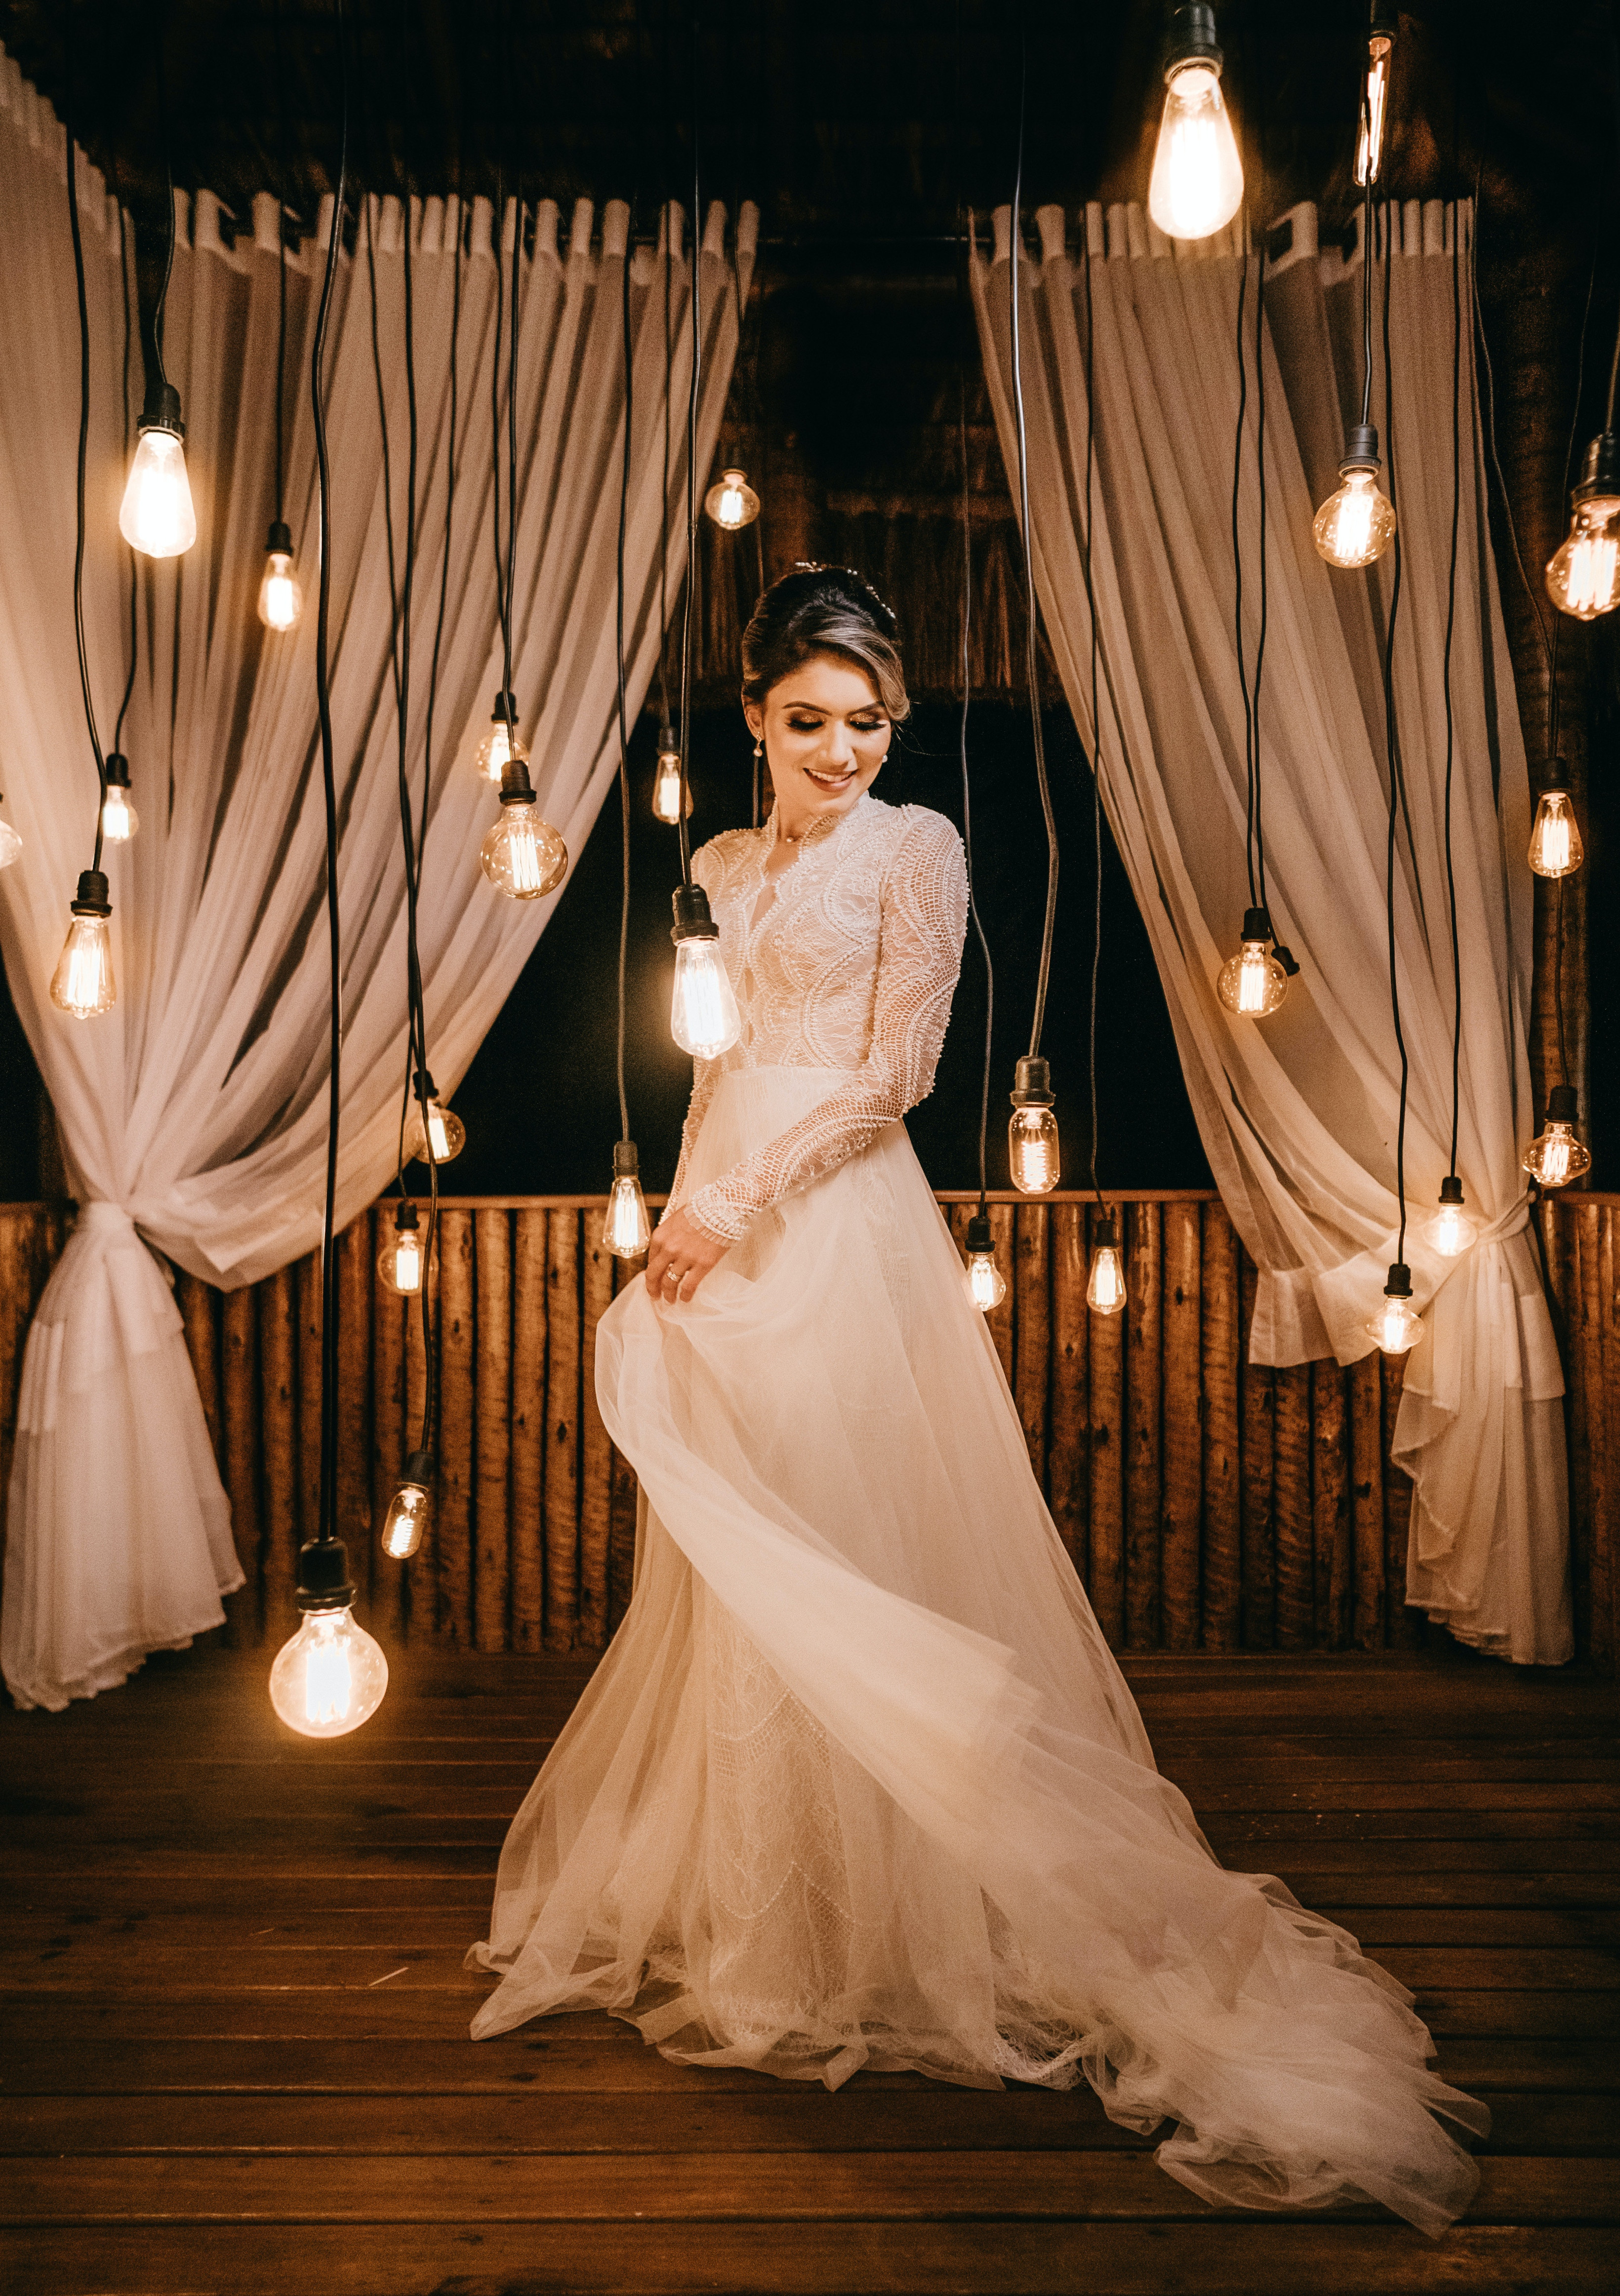 Wedding Dress with Hanging Lights in the Background